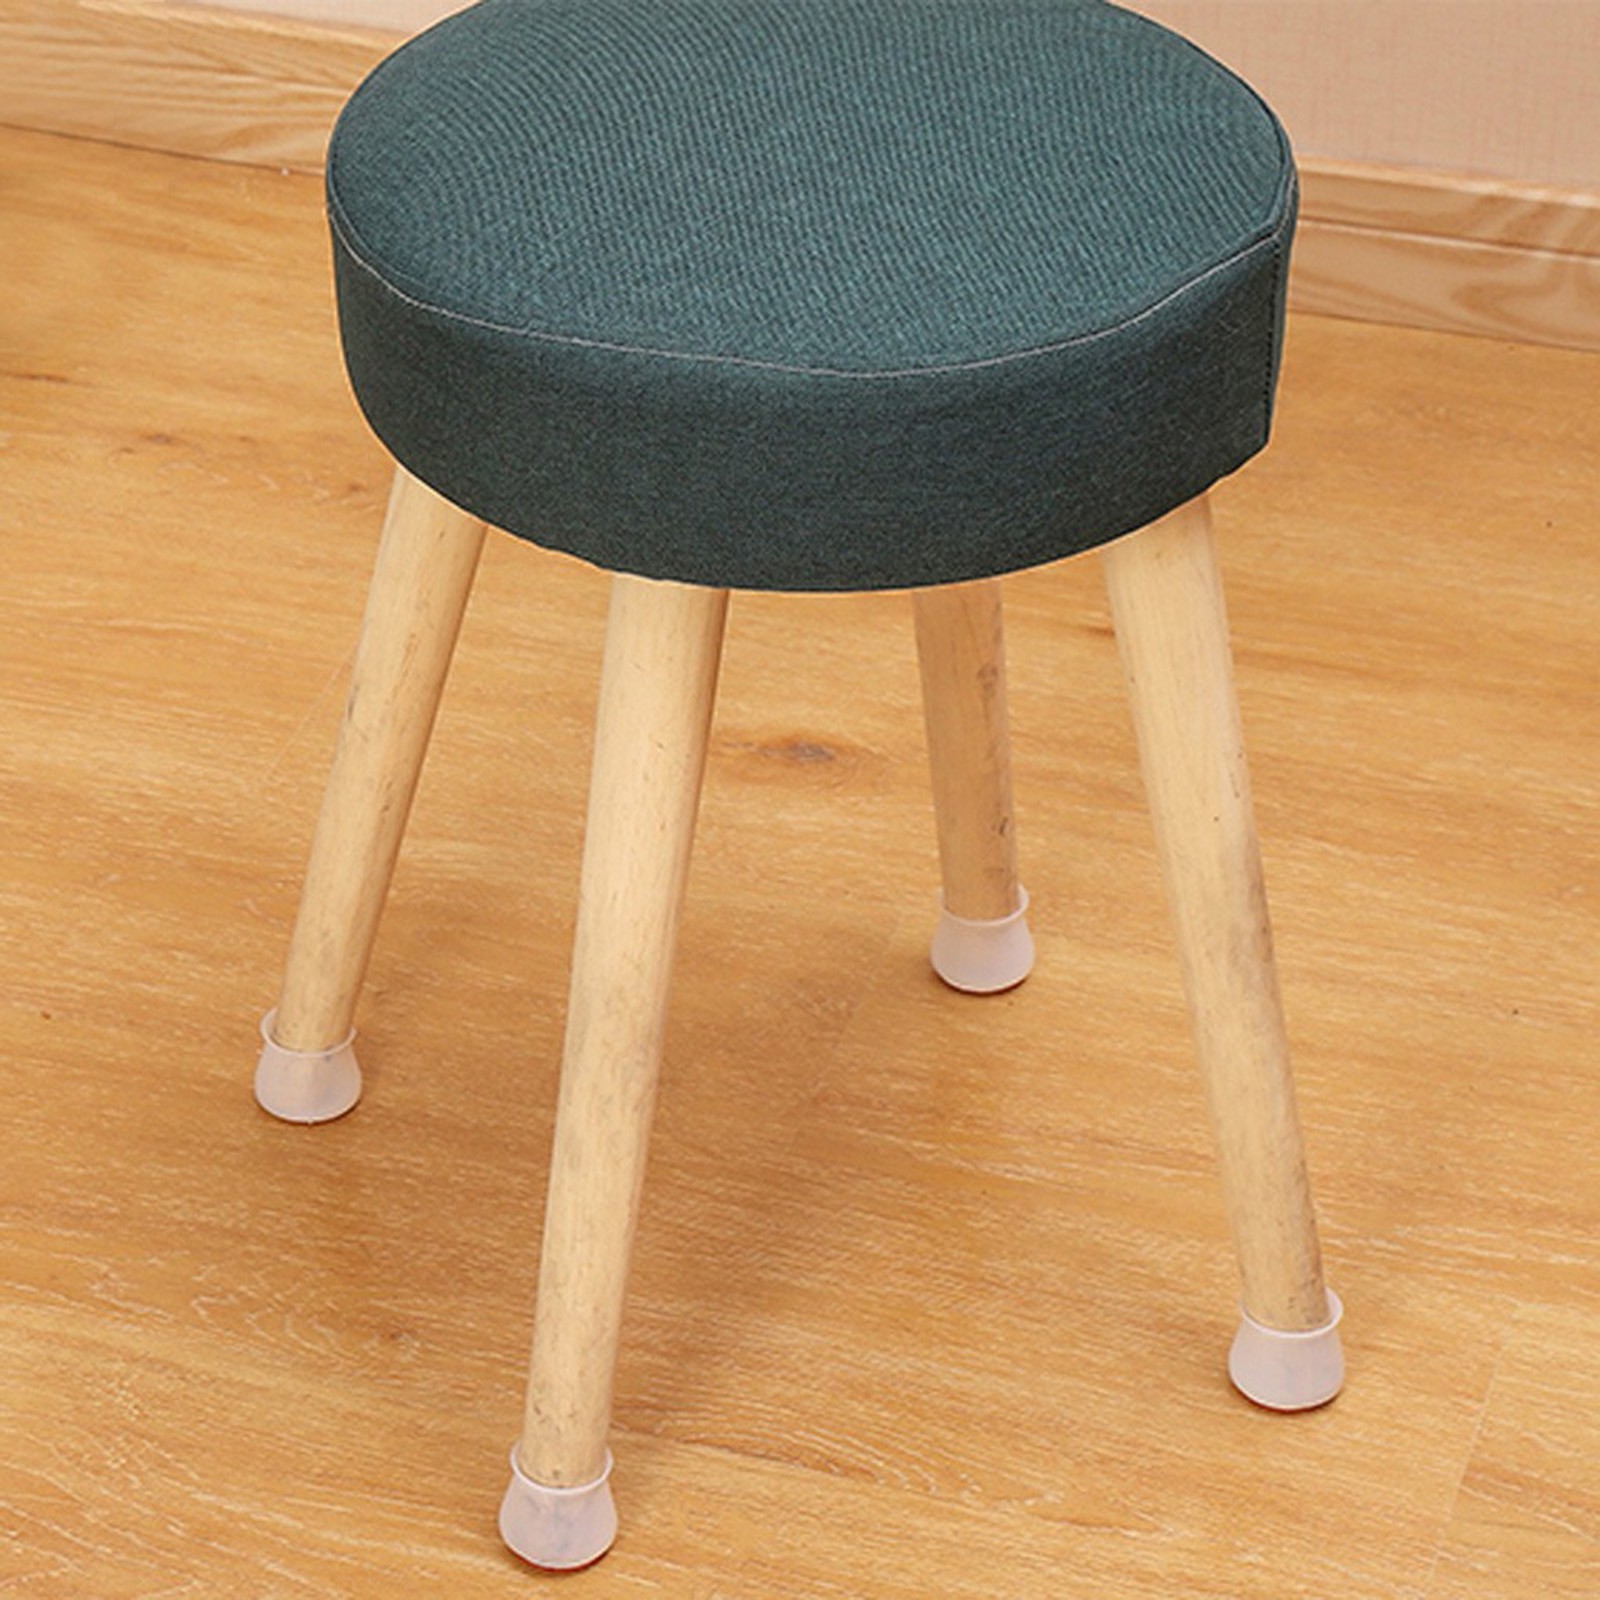 4/8/16/32/64/ Pcs Silicone Chair Leg Caps Felt Table And Chair Protective Cover Furniture Table Feet Cover Anti-Floor Protector